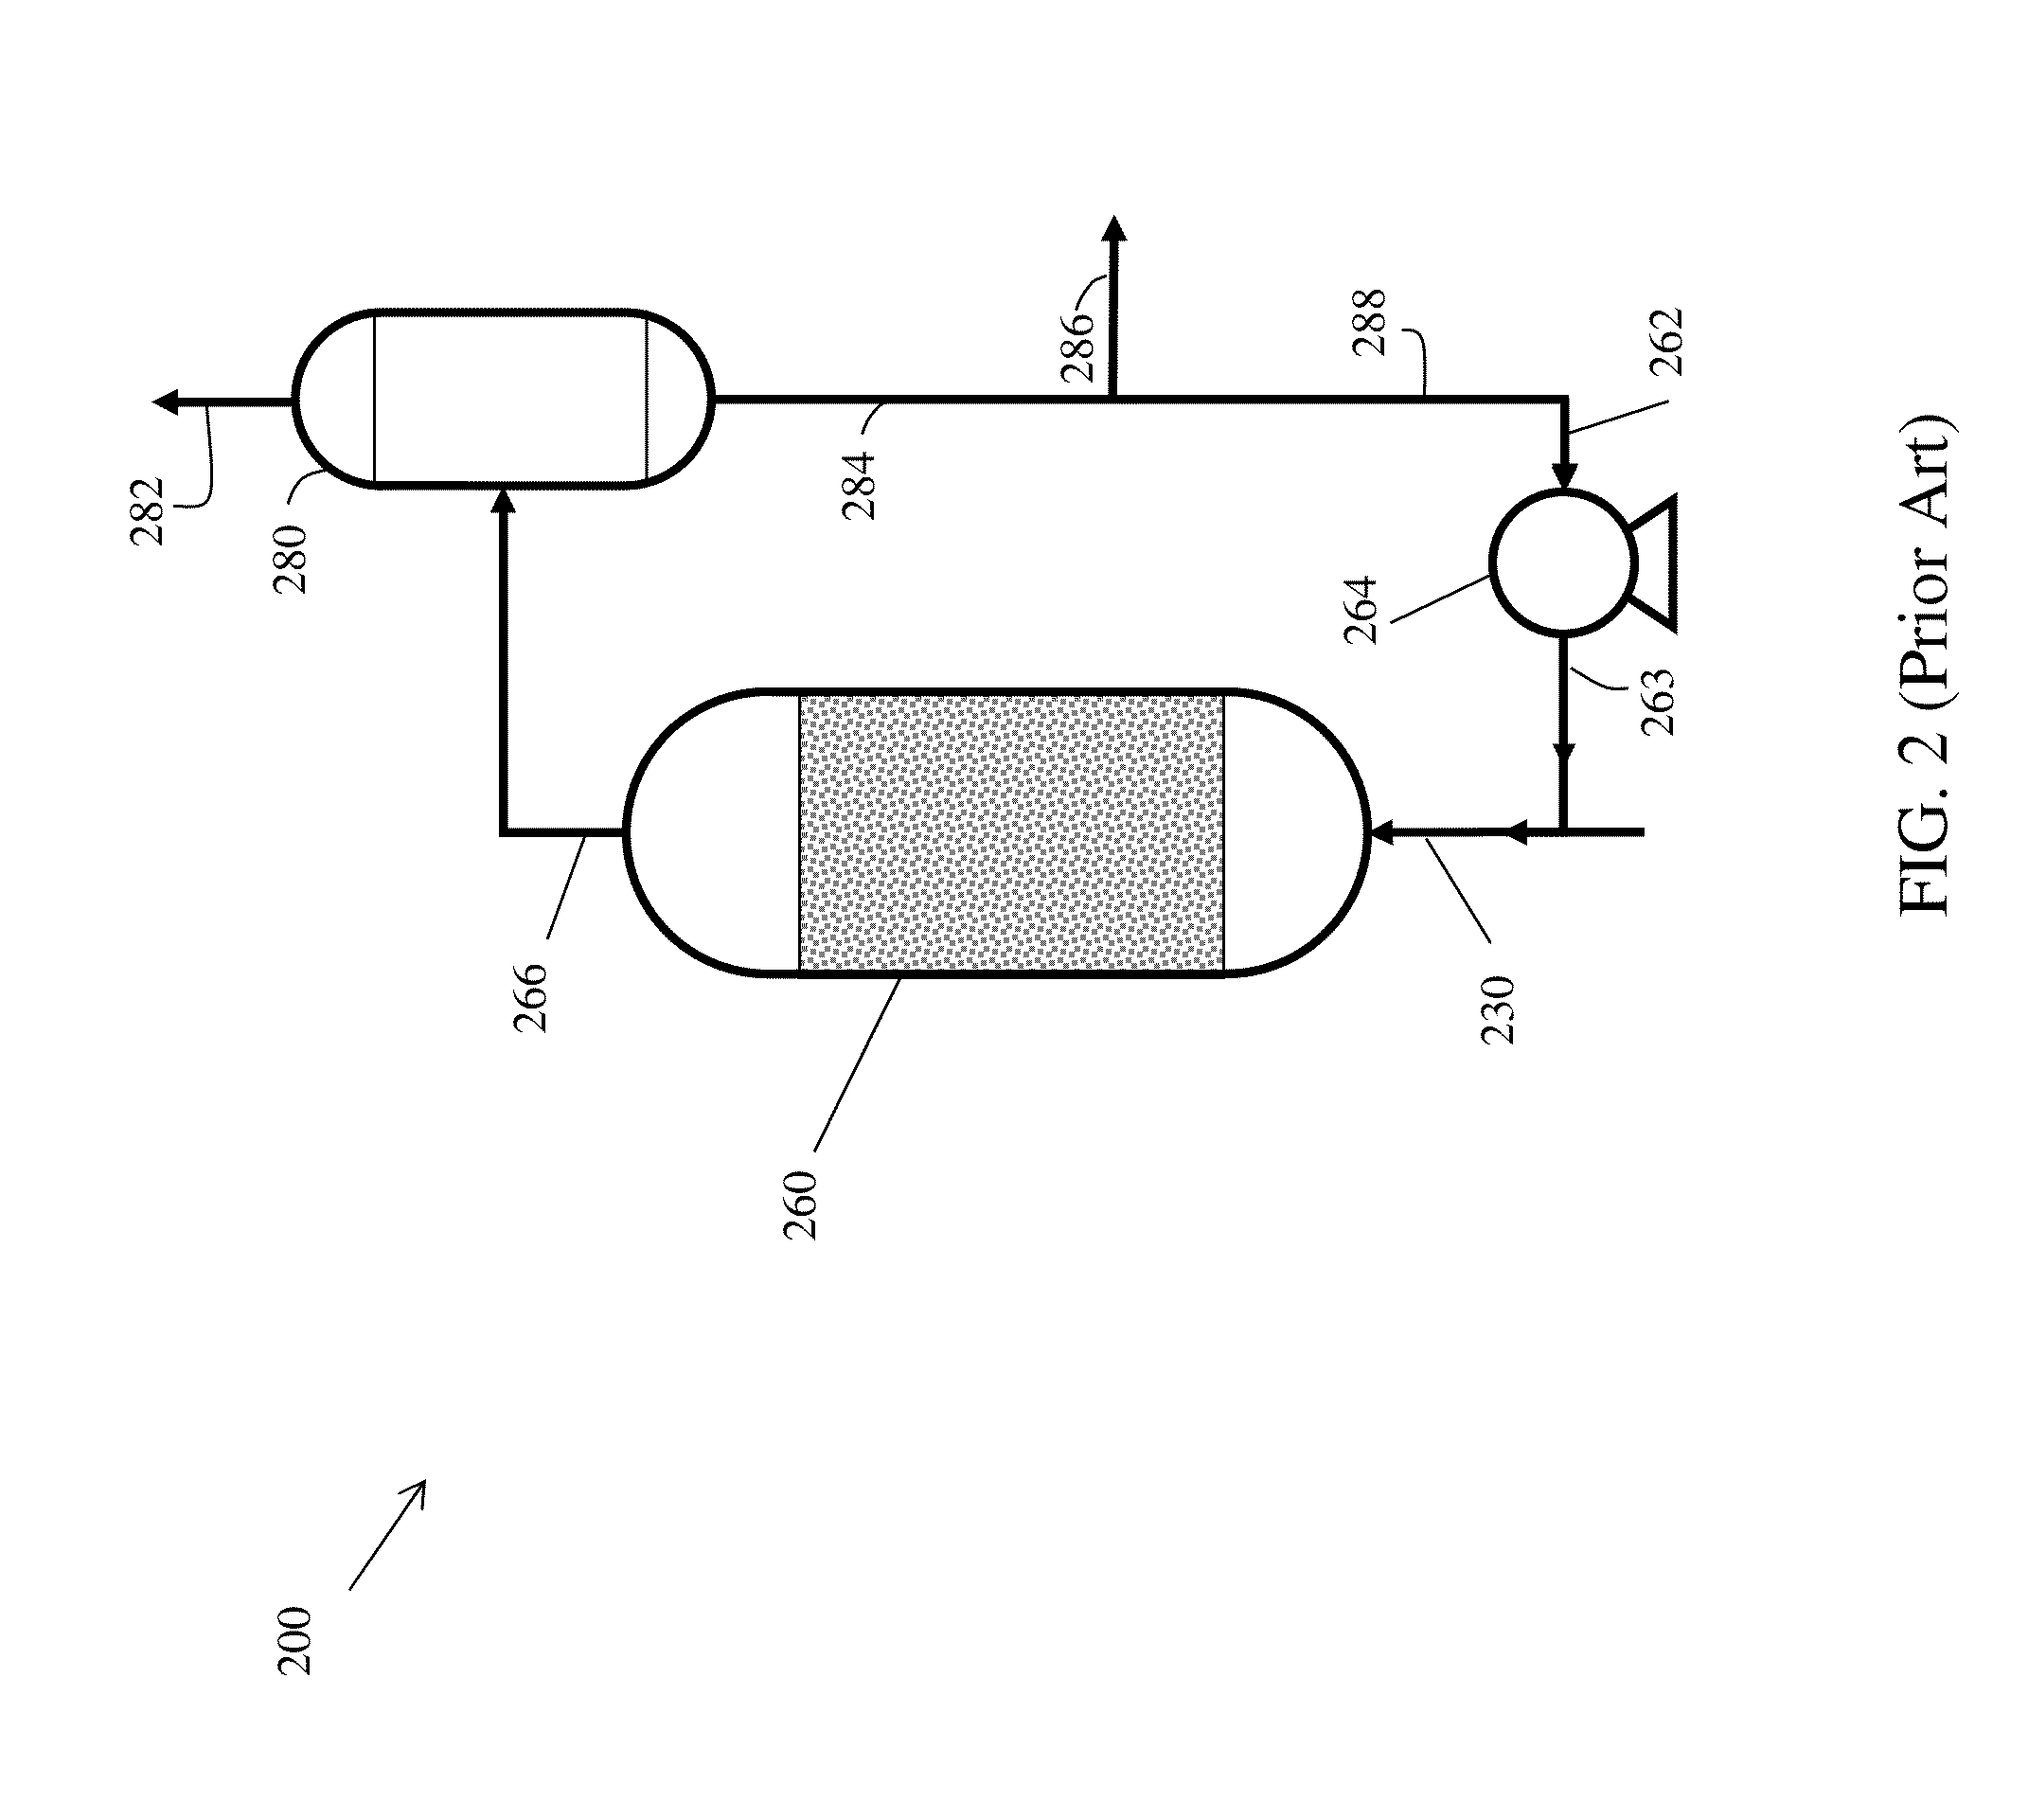 Ebullated-bed process for feedstock containing dissolved hydrogen